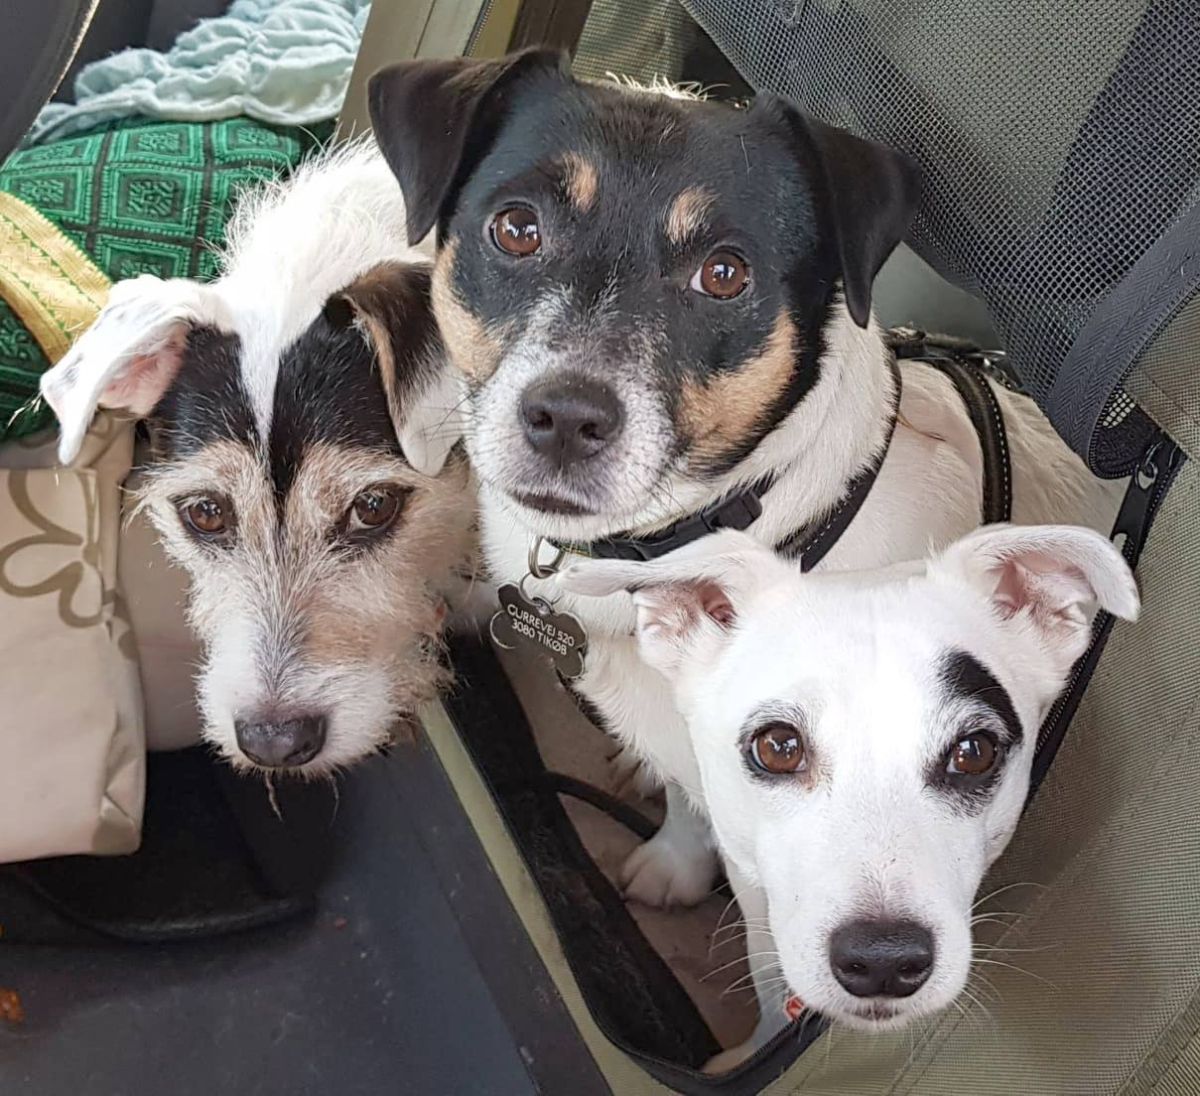 brown and black terrier, small black brown and white dog and small white dog with black eyebrow sitting together